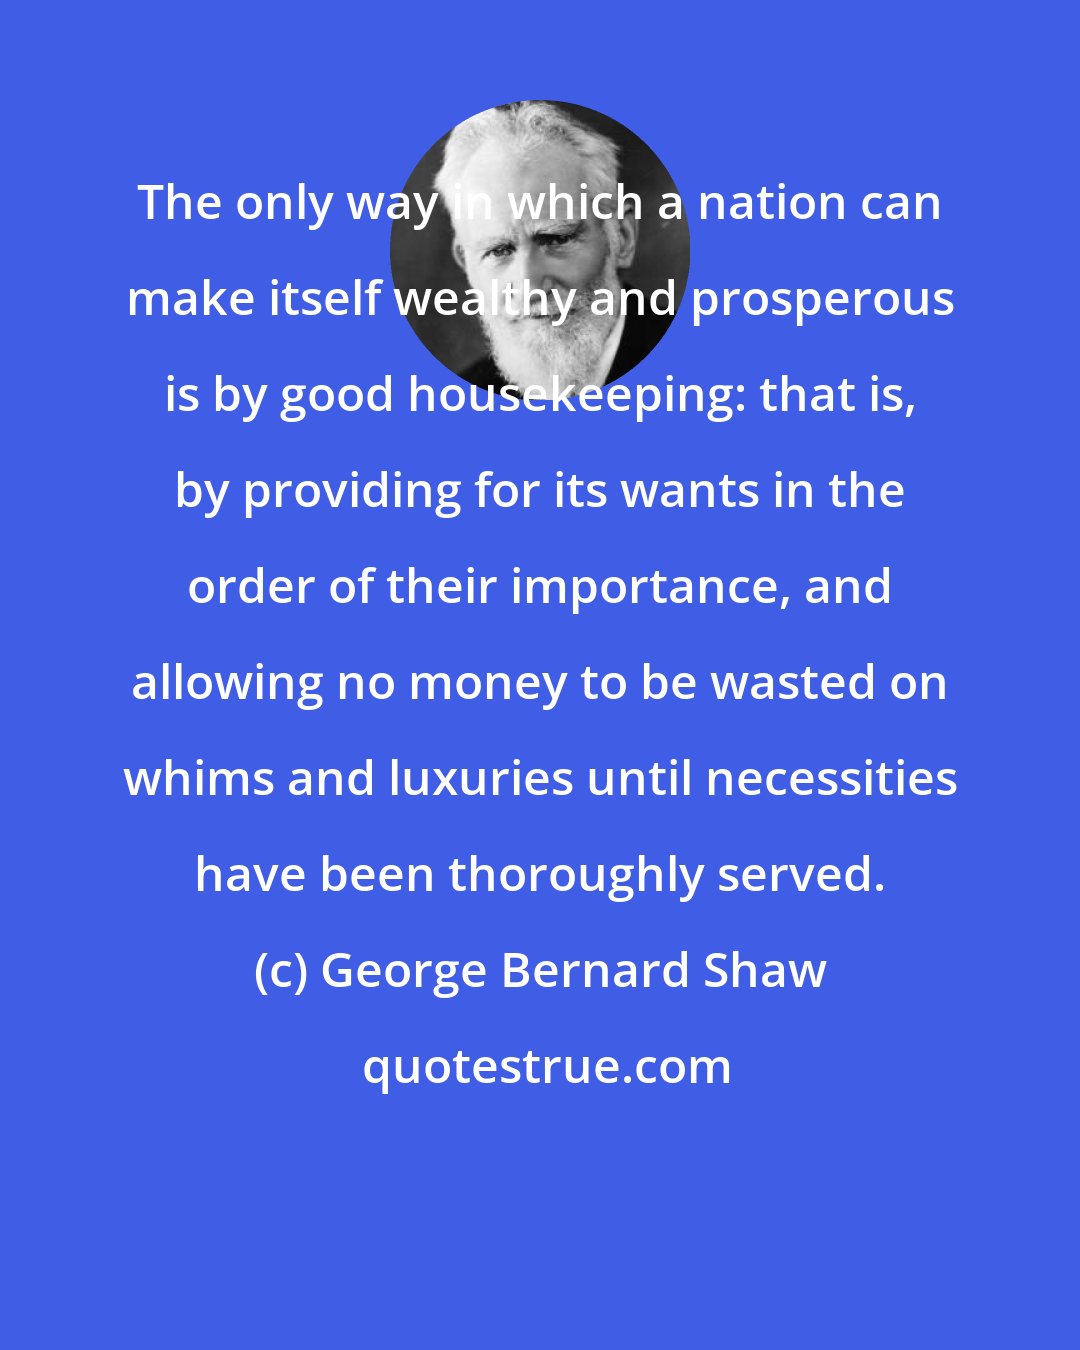 George Bernard Shaw: The only way in which a nation can make itself wealthy and prosperous is by good housekeeping: that is, by providing for its wants in the order of their importance, and allowing no money to be wasted on whims and luxuries until necessities have been thoroughly served.